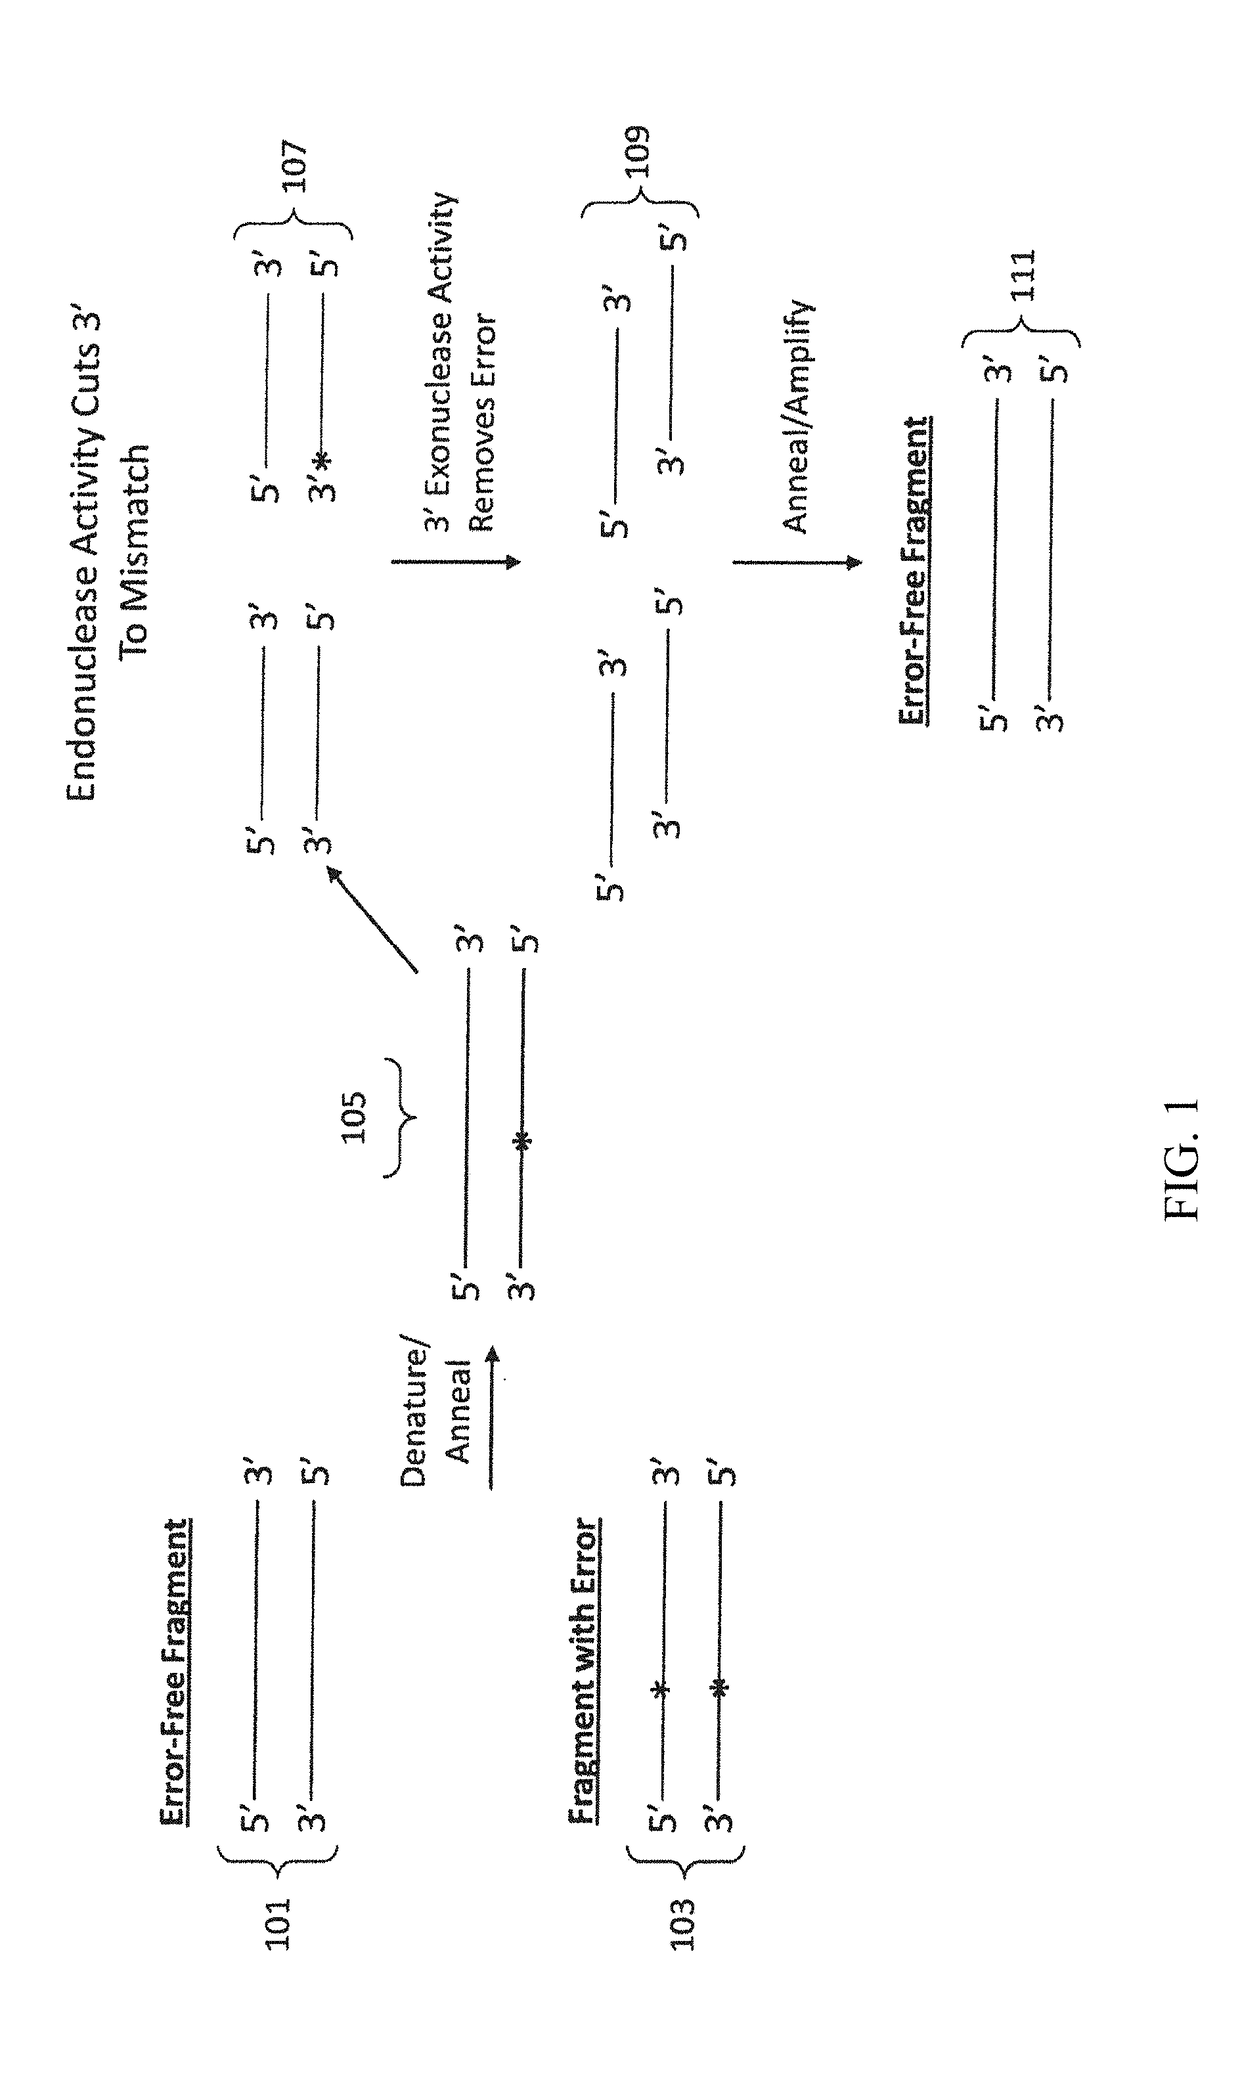 Materials and methods for the synthesis of error-minimized nucleic acid molecules